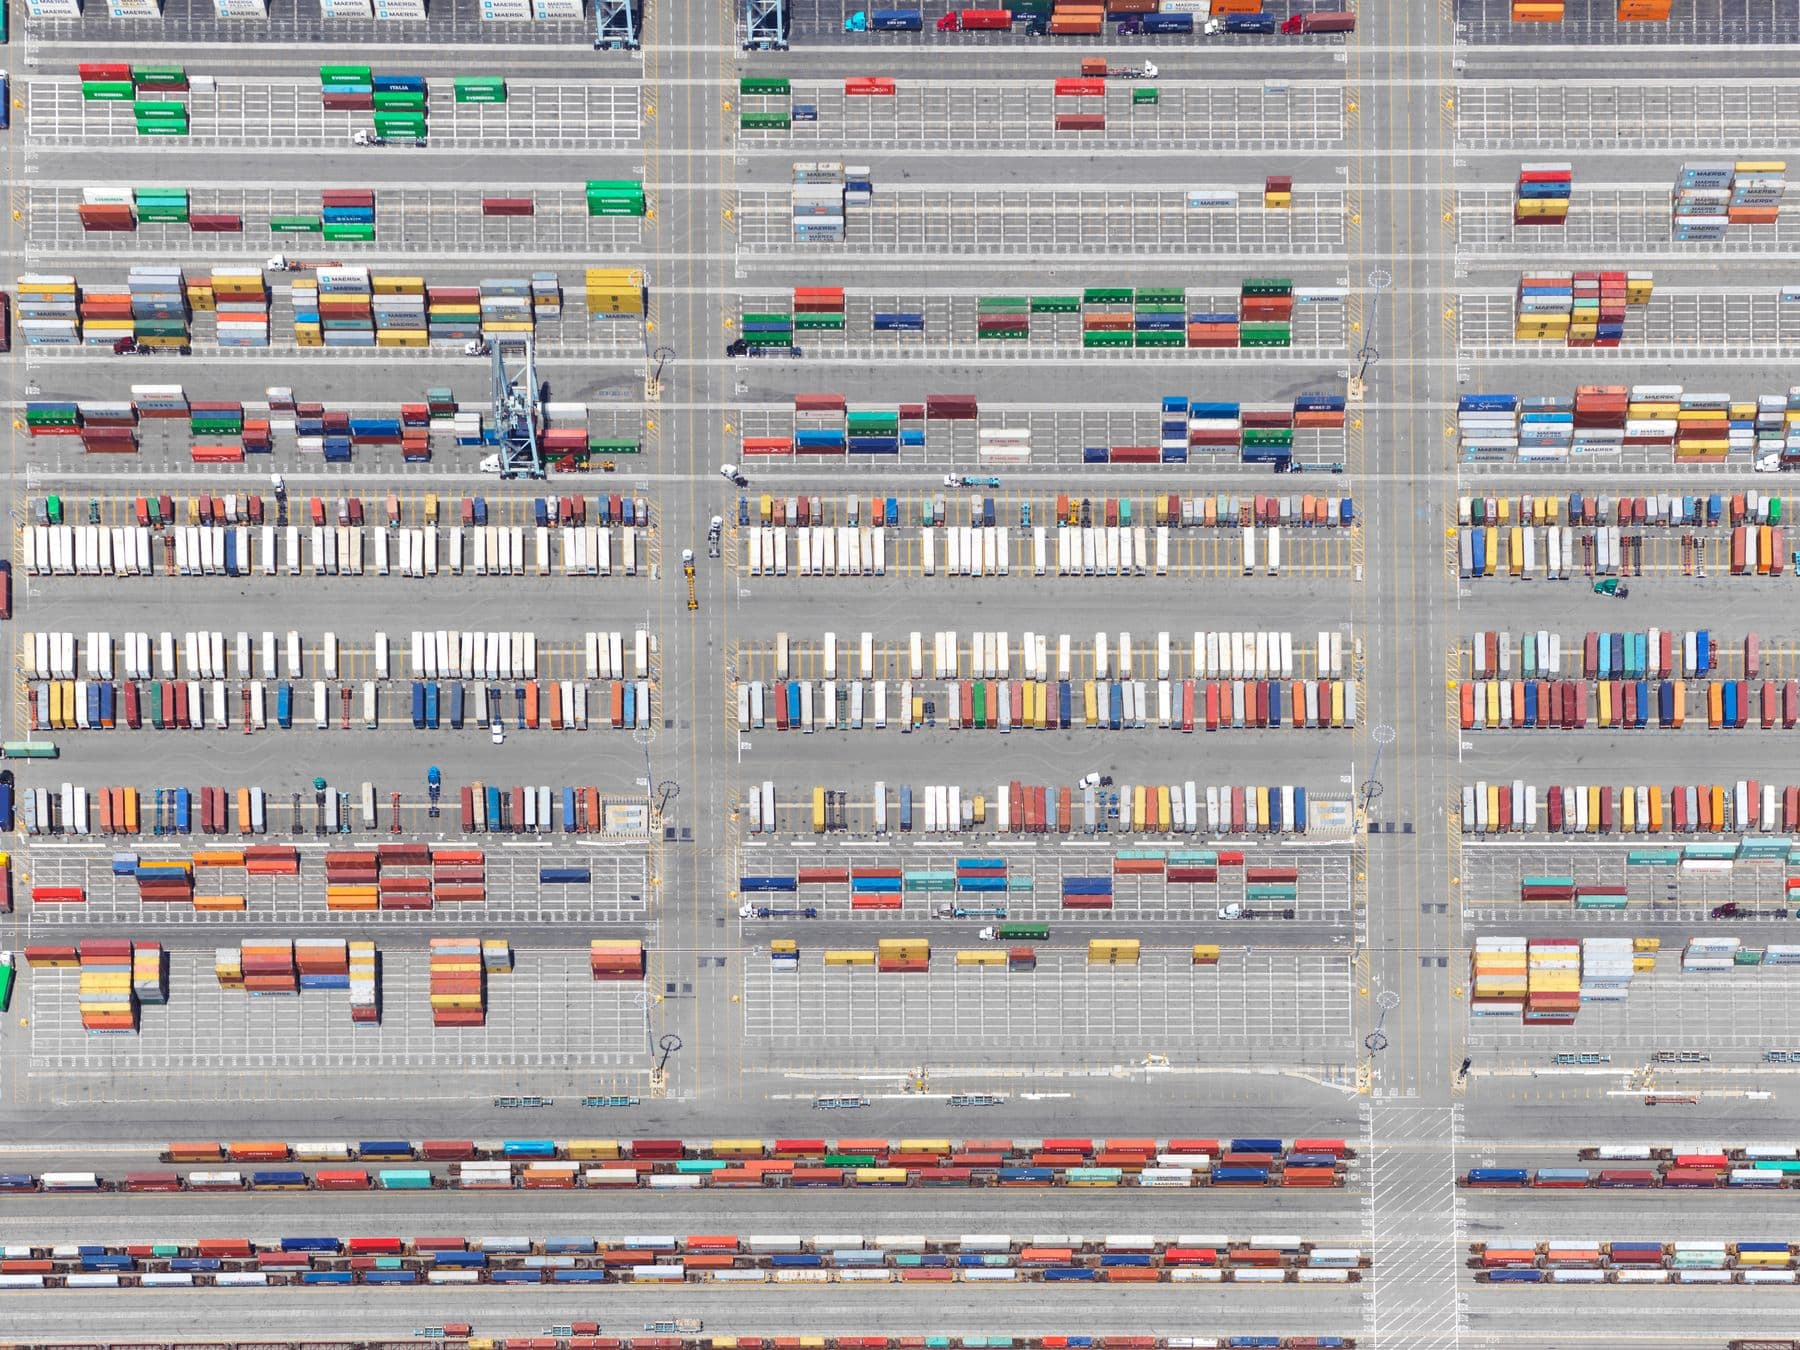 A shipping yard with organized containers in an outdoor lot